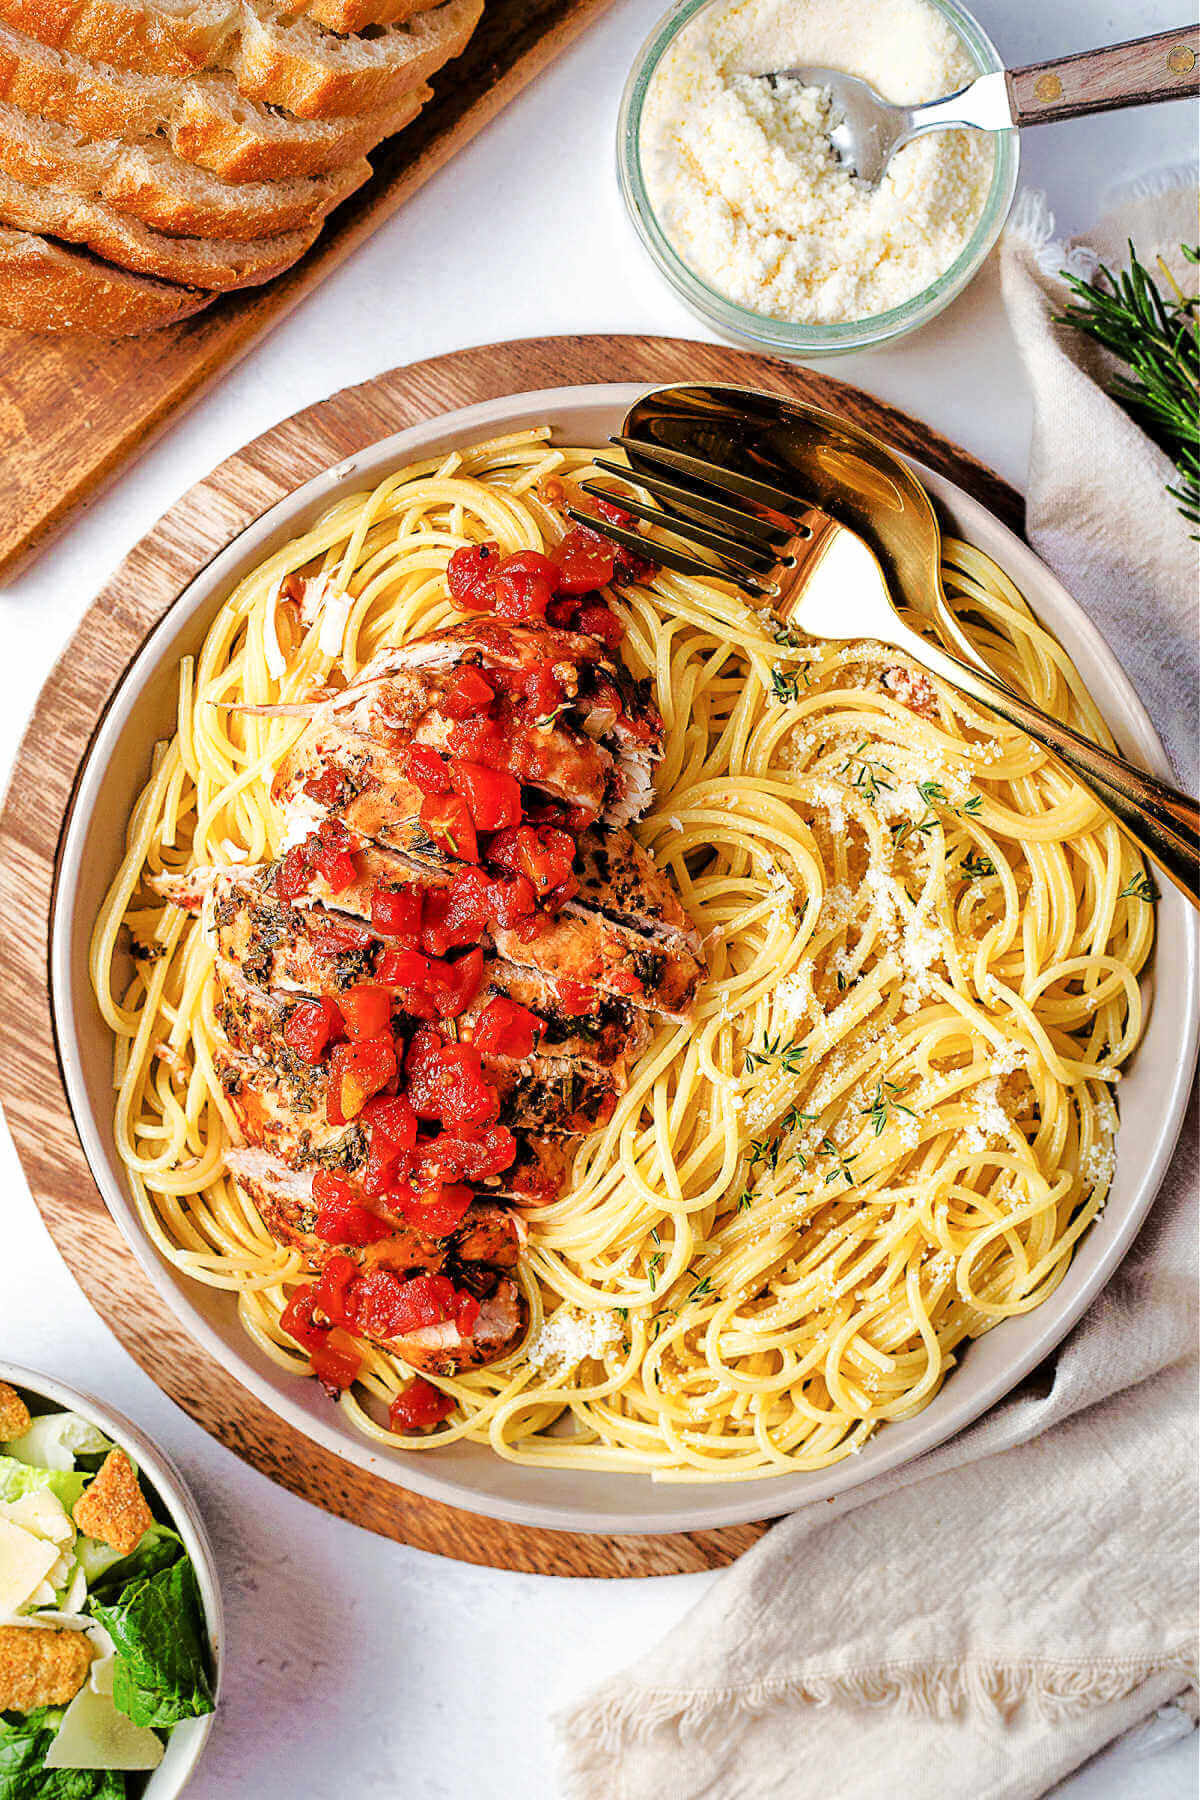 balsamic chicken sliced on top of a bed of spaghetti on a table with bread and grated parmesan cheese.